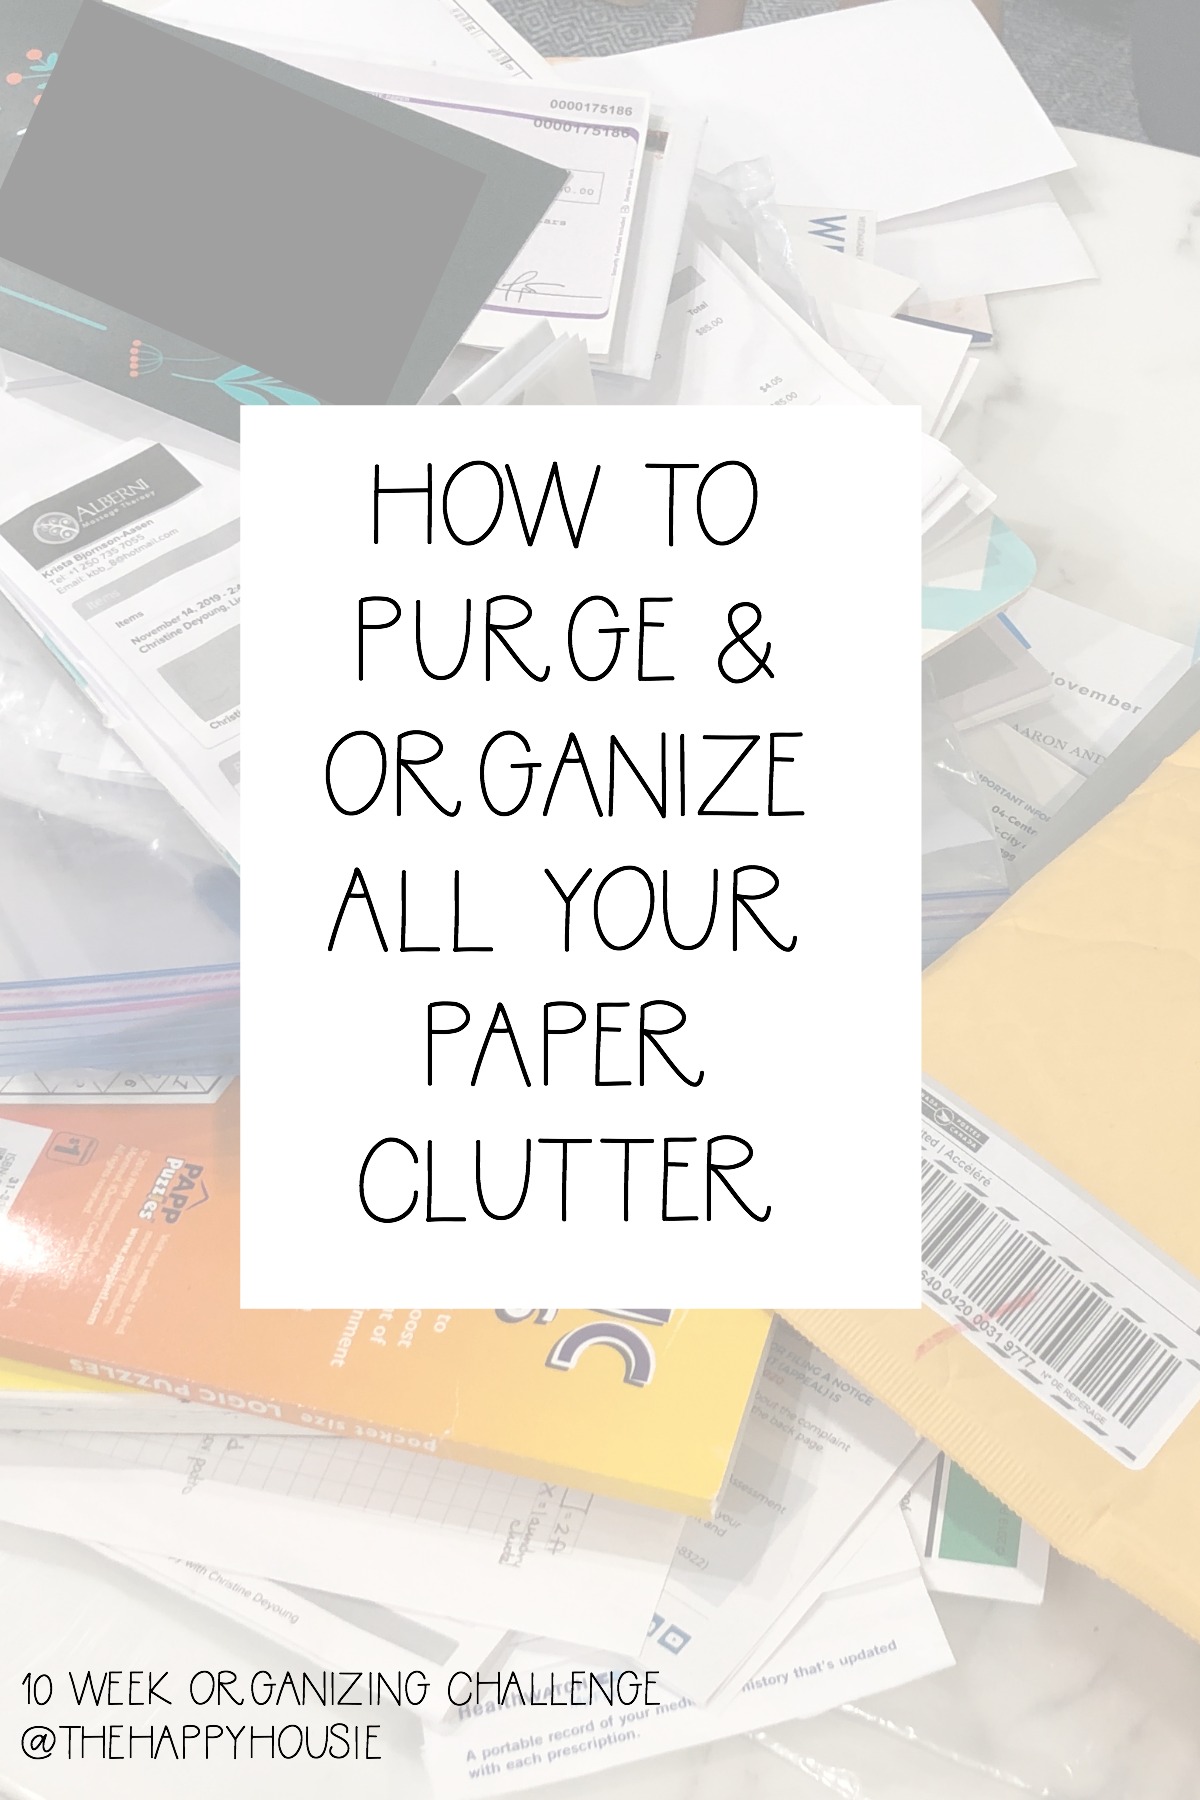 image of paperwork and label saying how to purge and organize your paper clutter